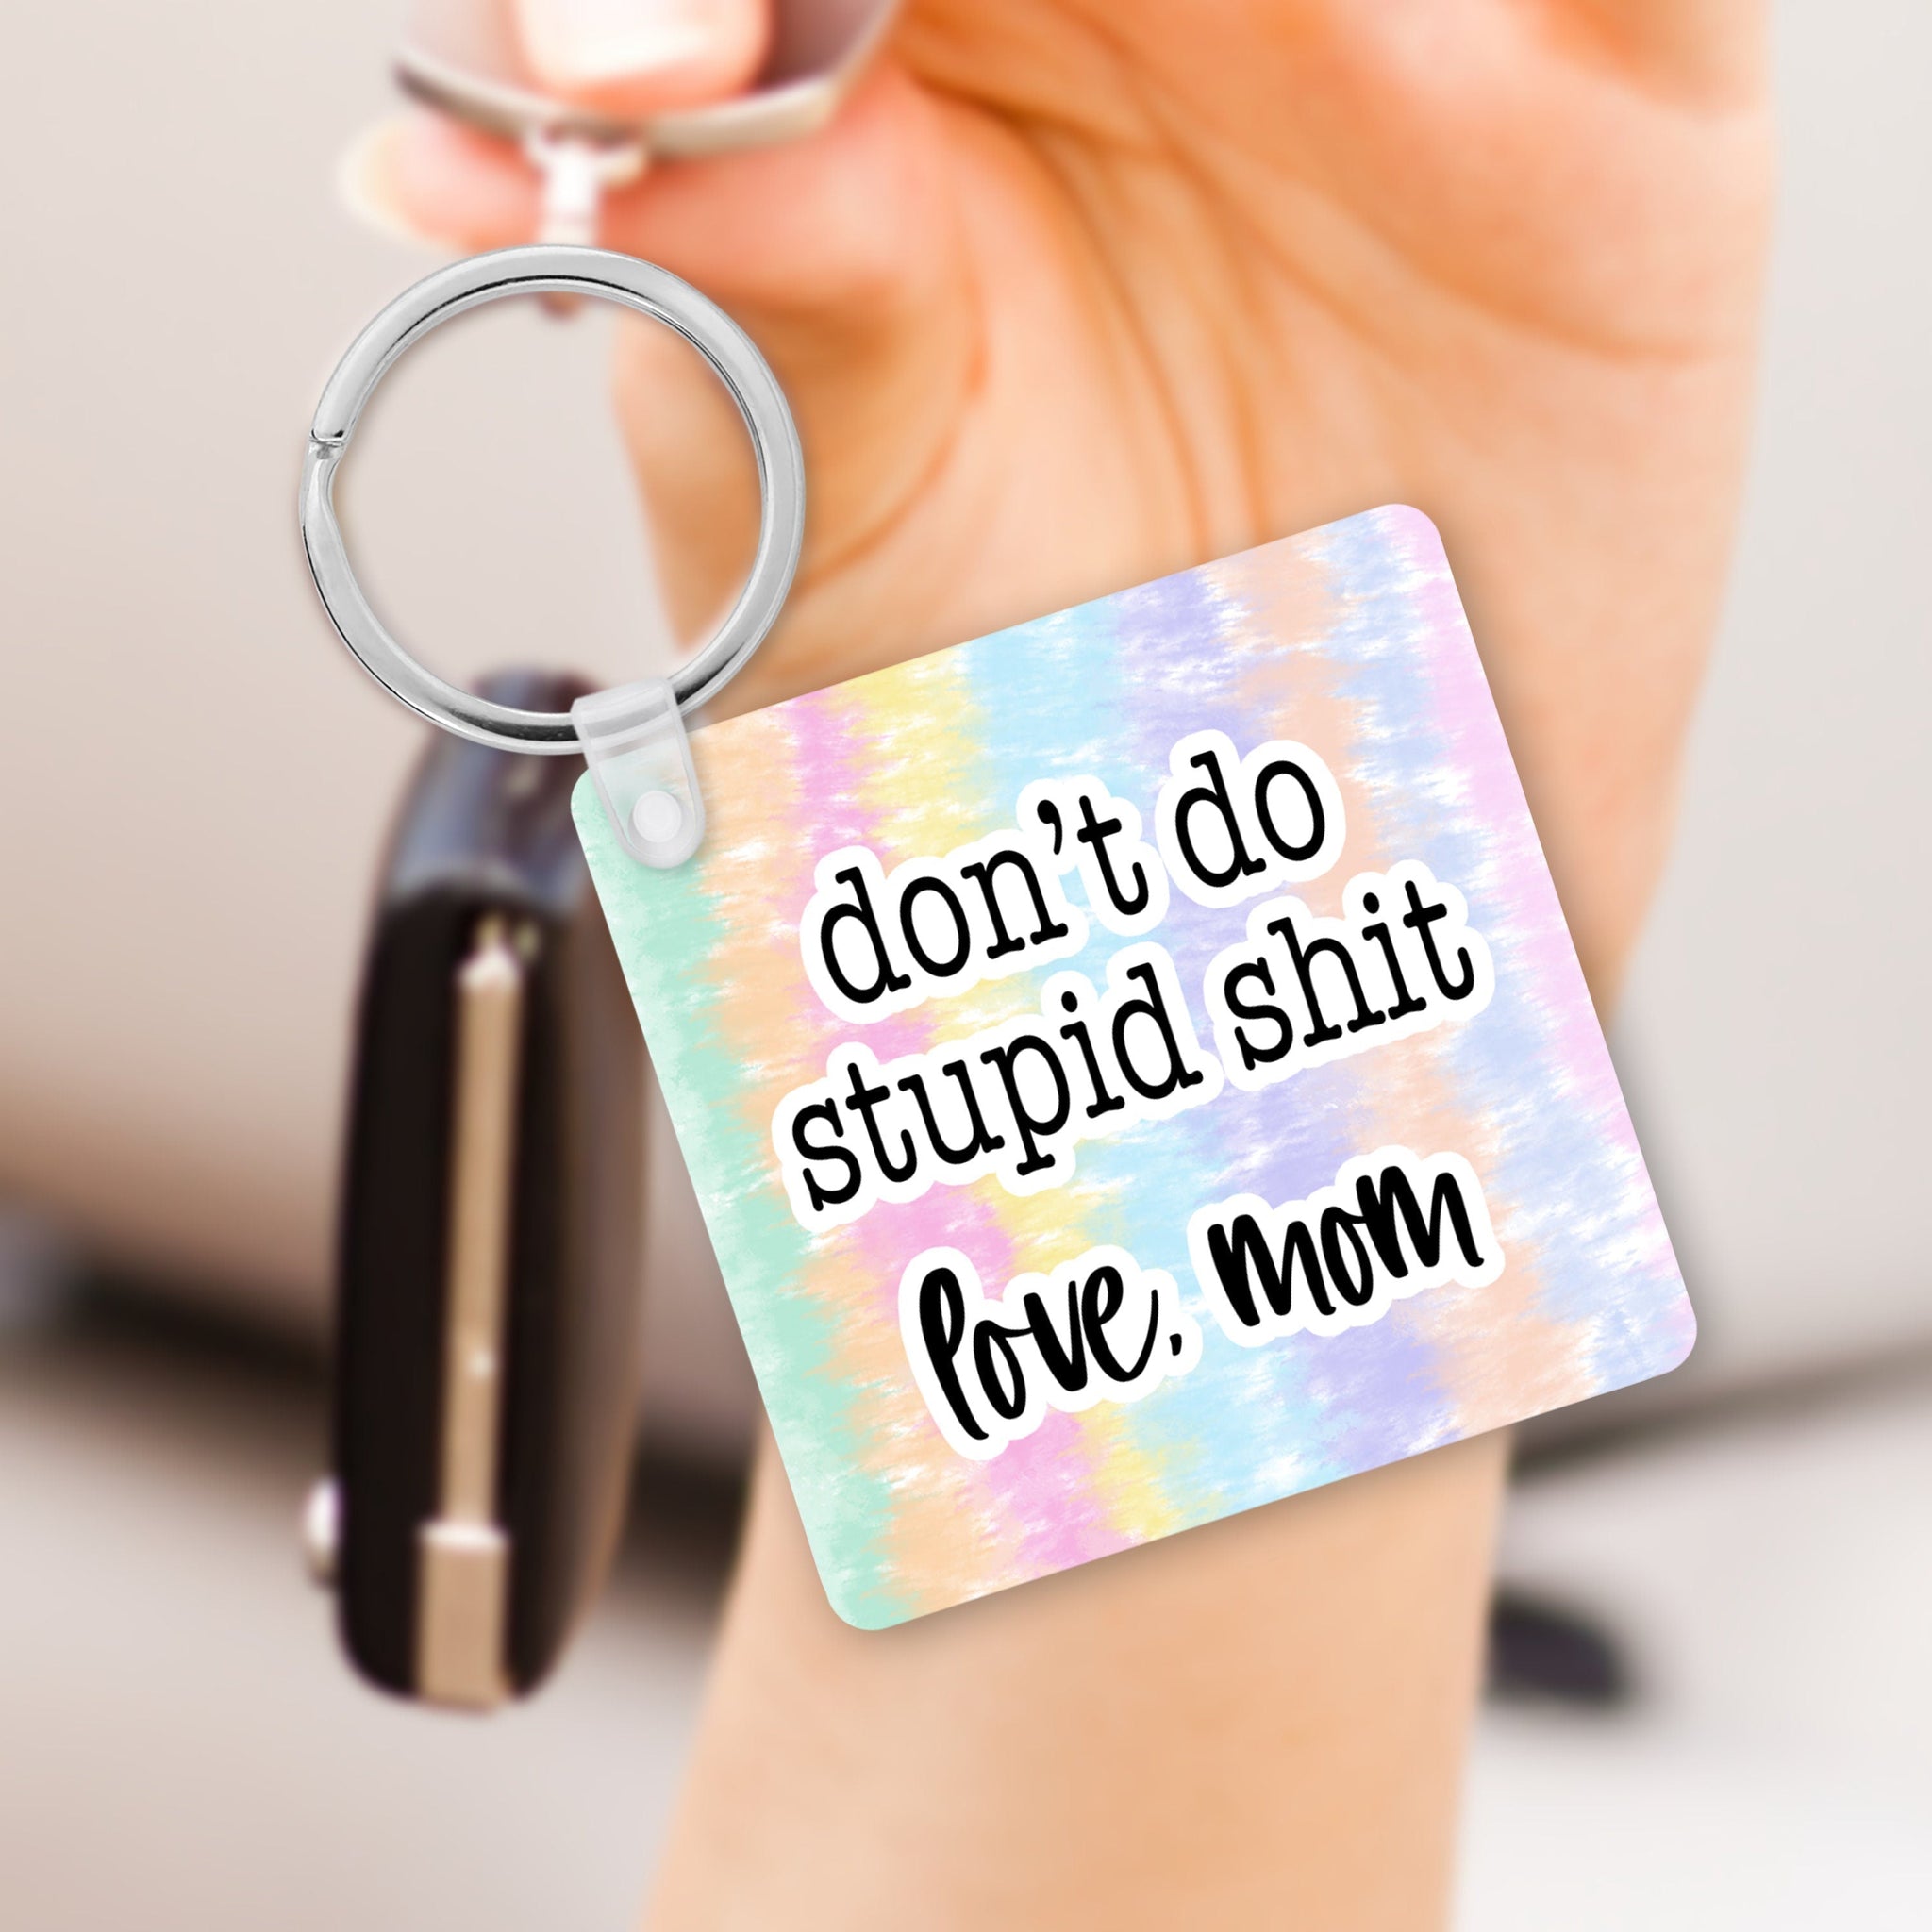 Don't do stupid shit, love (your name here) , keychain, from mom